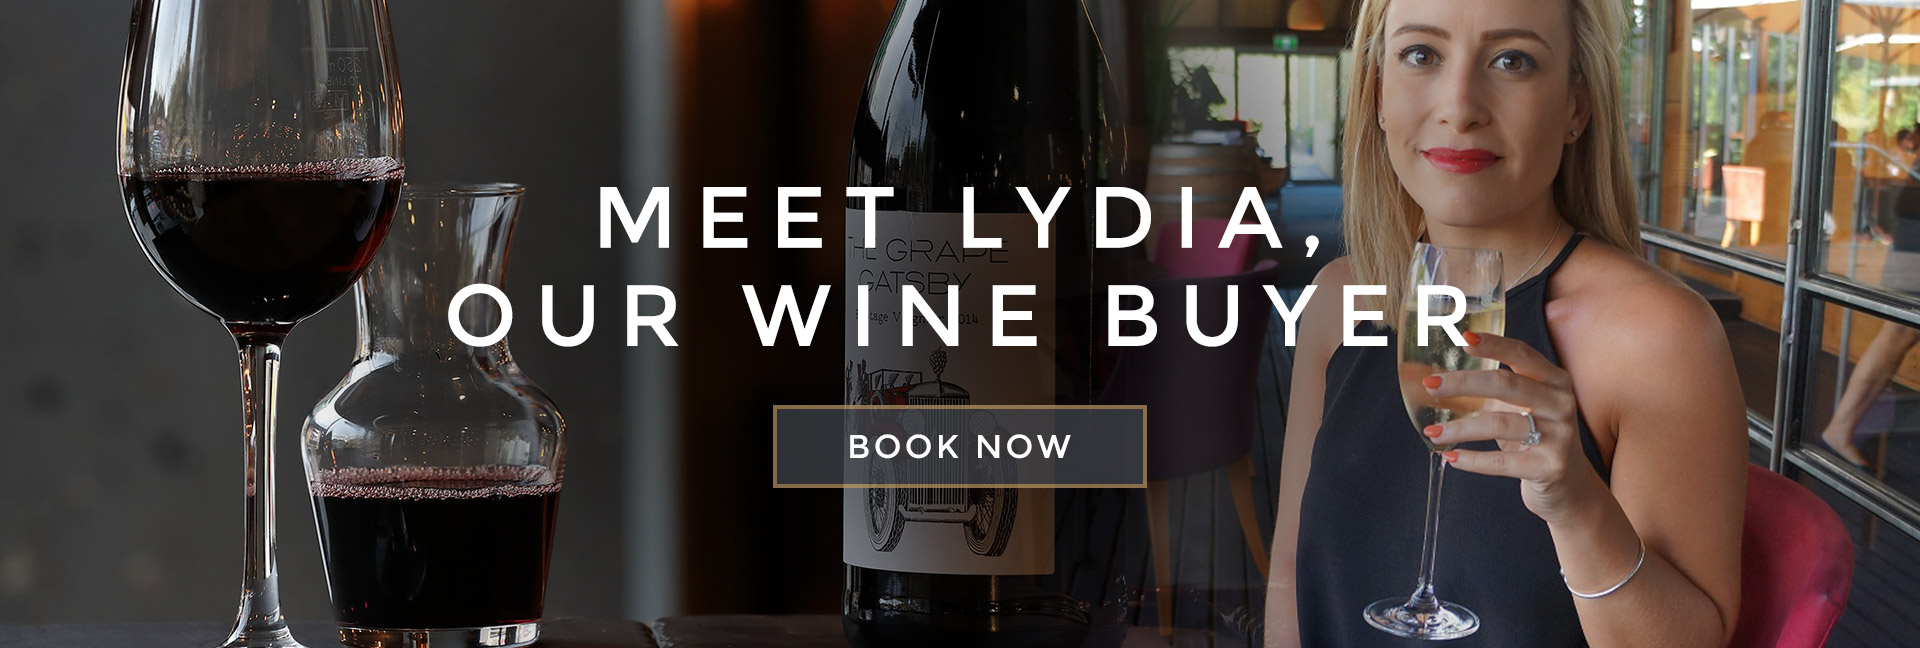 Meet Lydia, our wine buyer at All Bar One Butlers Wharf